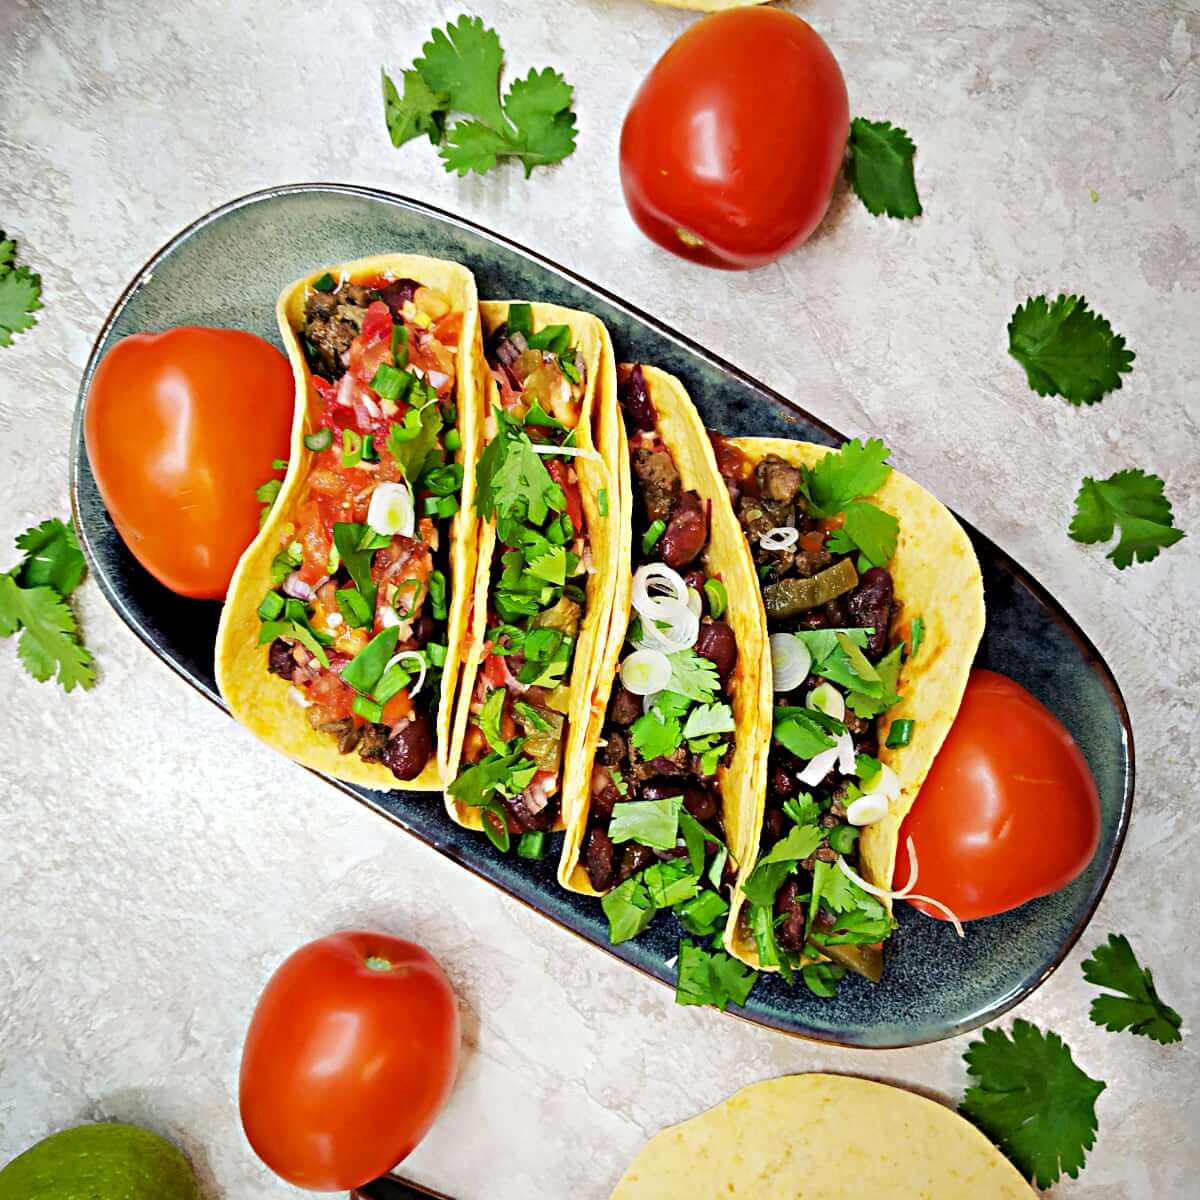 Mexican beef tacos